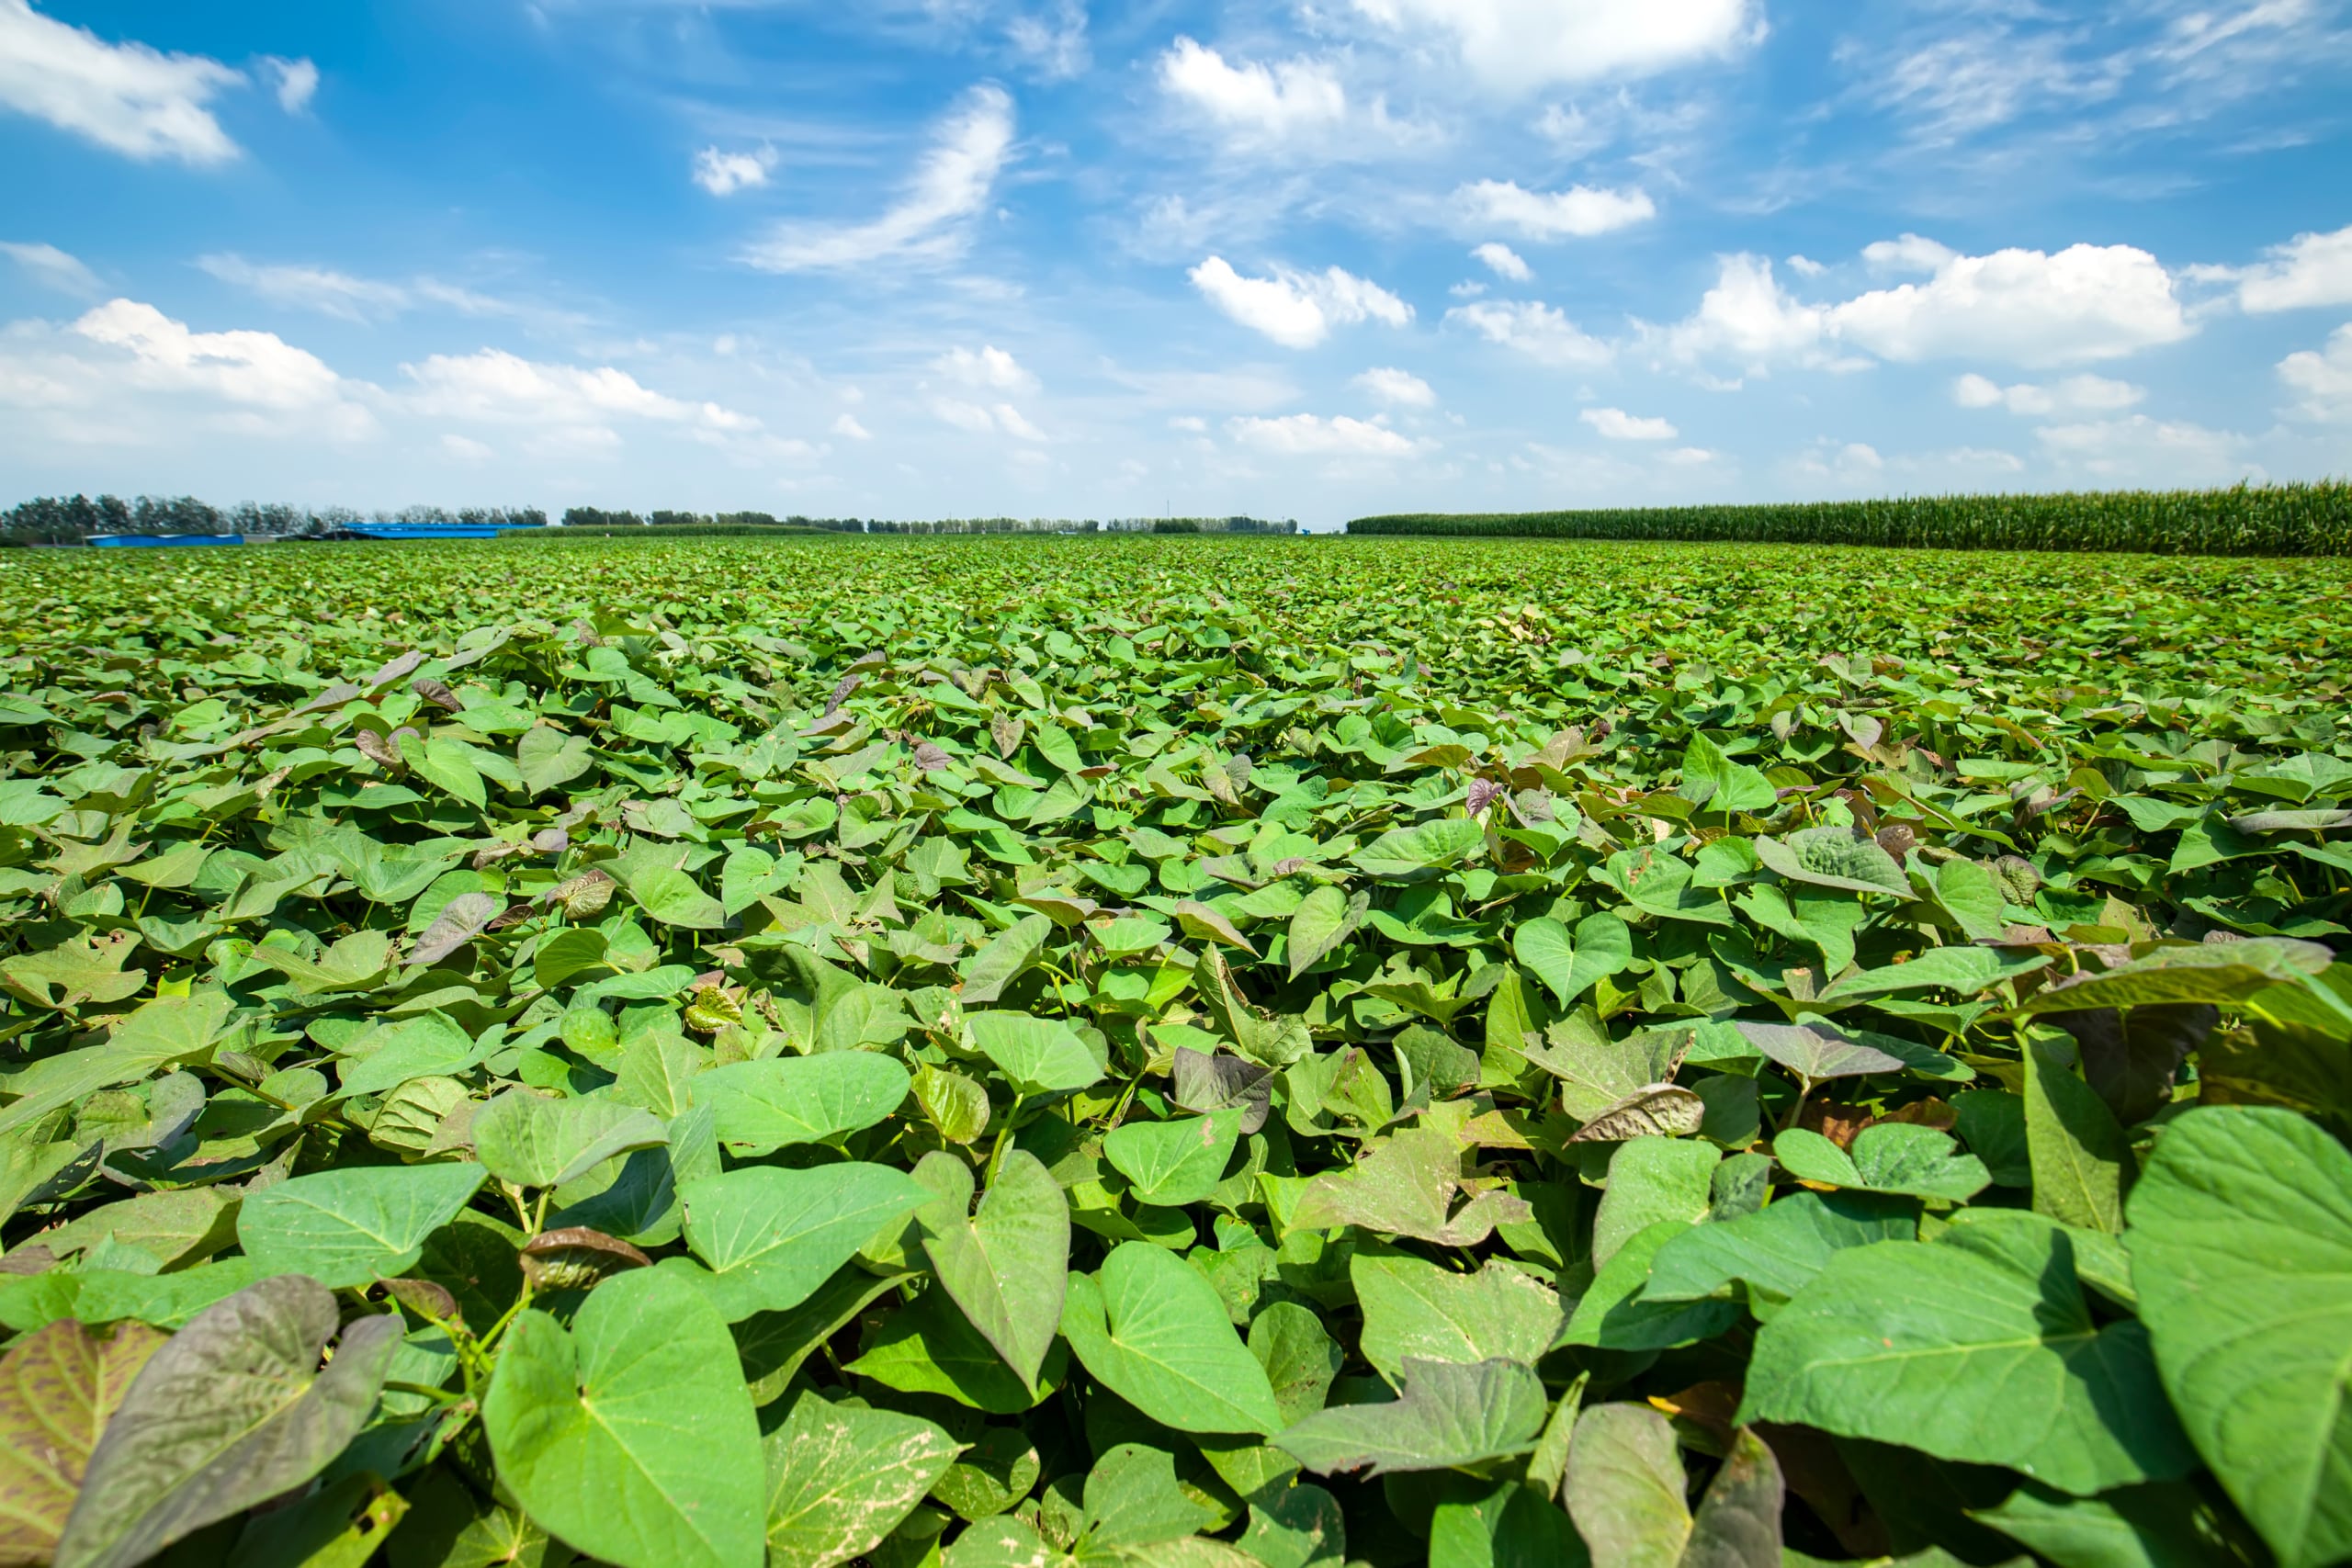 Field of green sweet potato leaves with blue sky and white wispy clouds